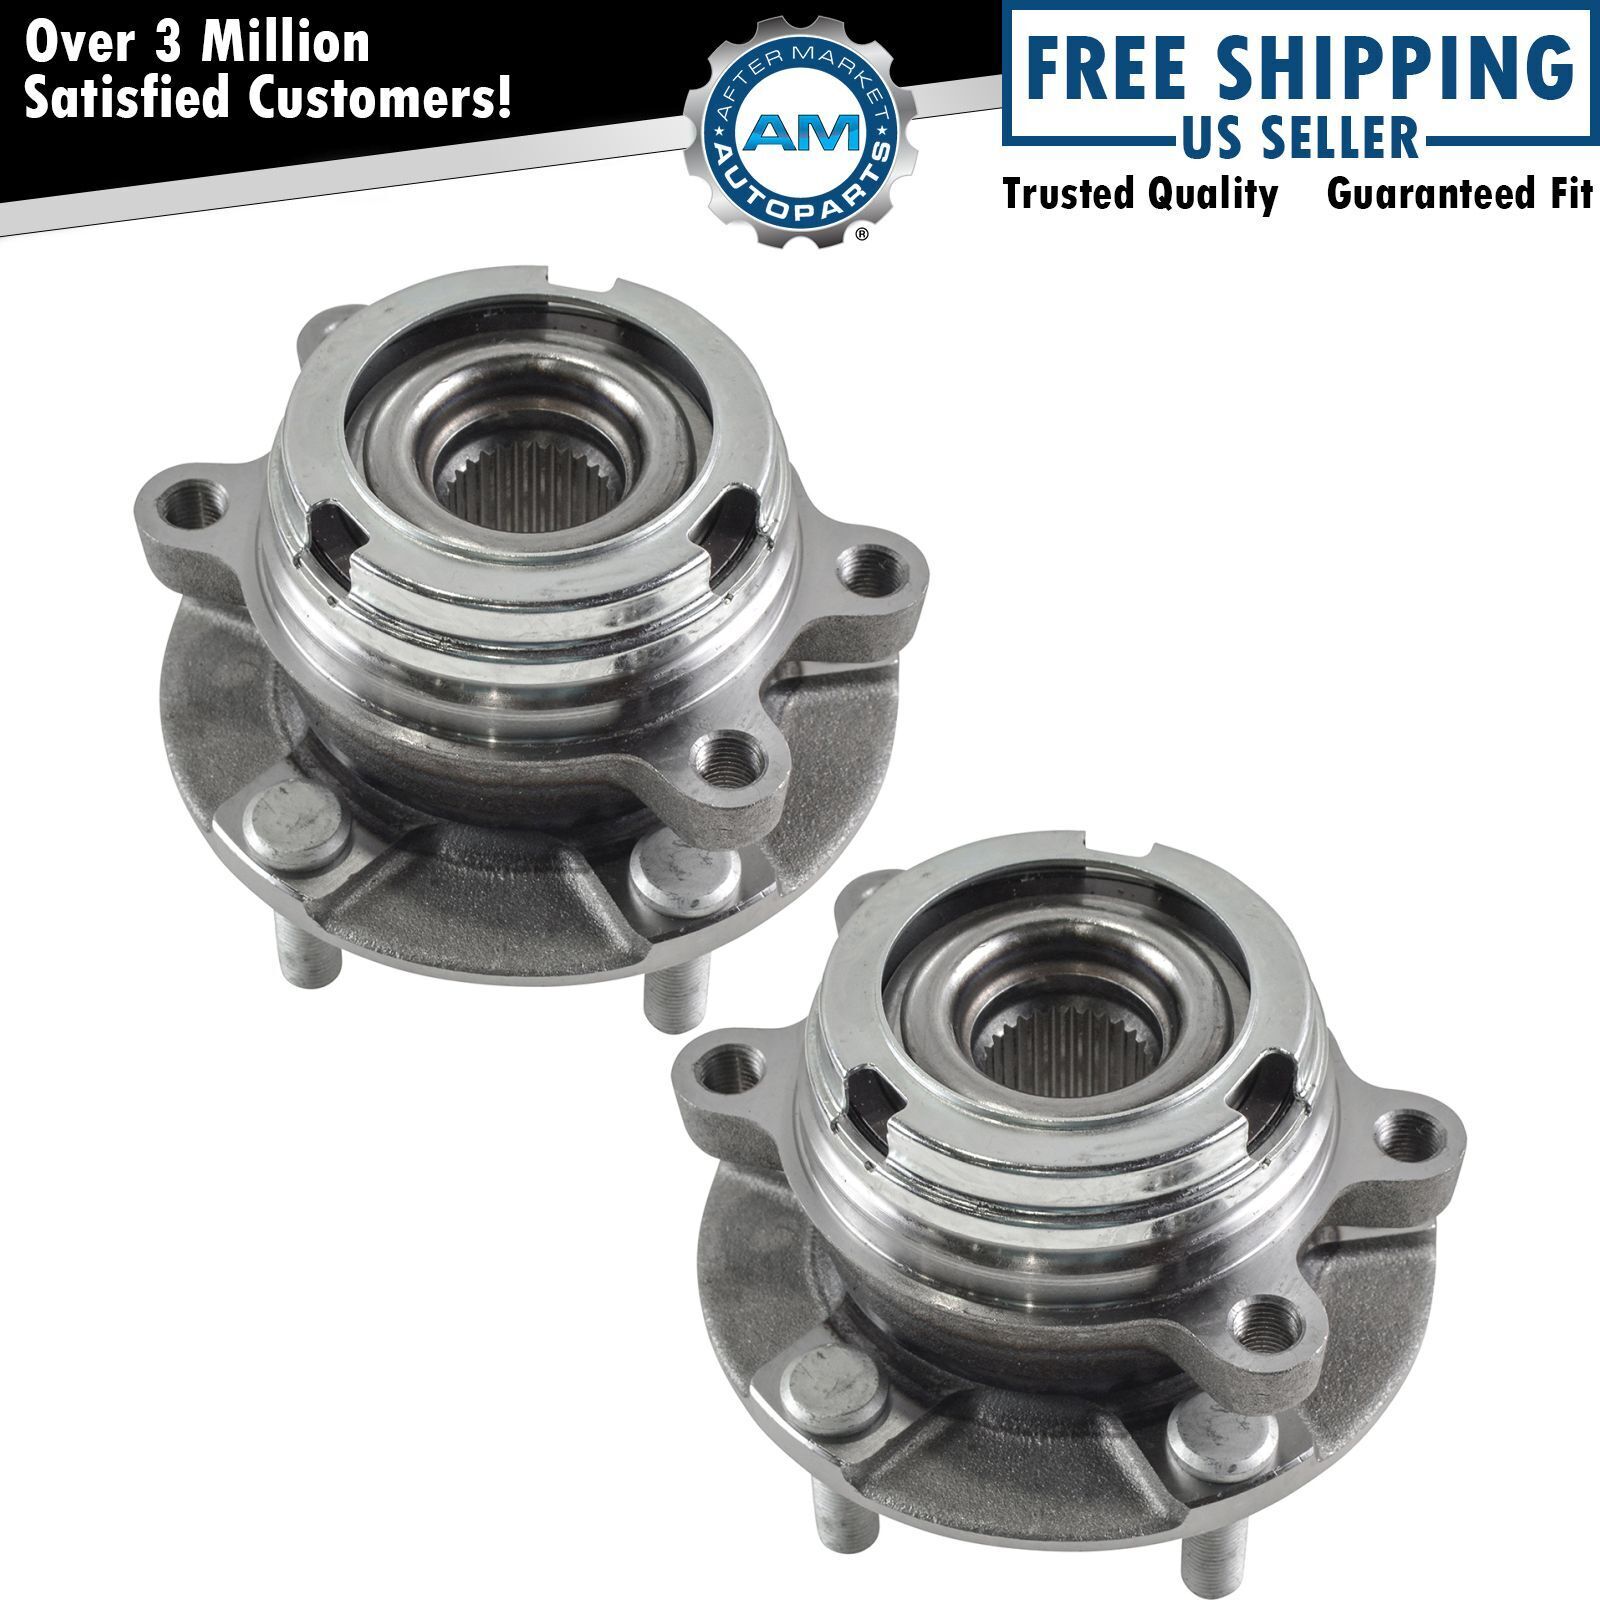 2 Front Wheel Bearing Hub Assembly Fits  04-09 Nissan Quest 03-07 Nissan Murano